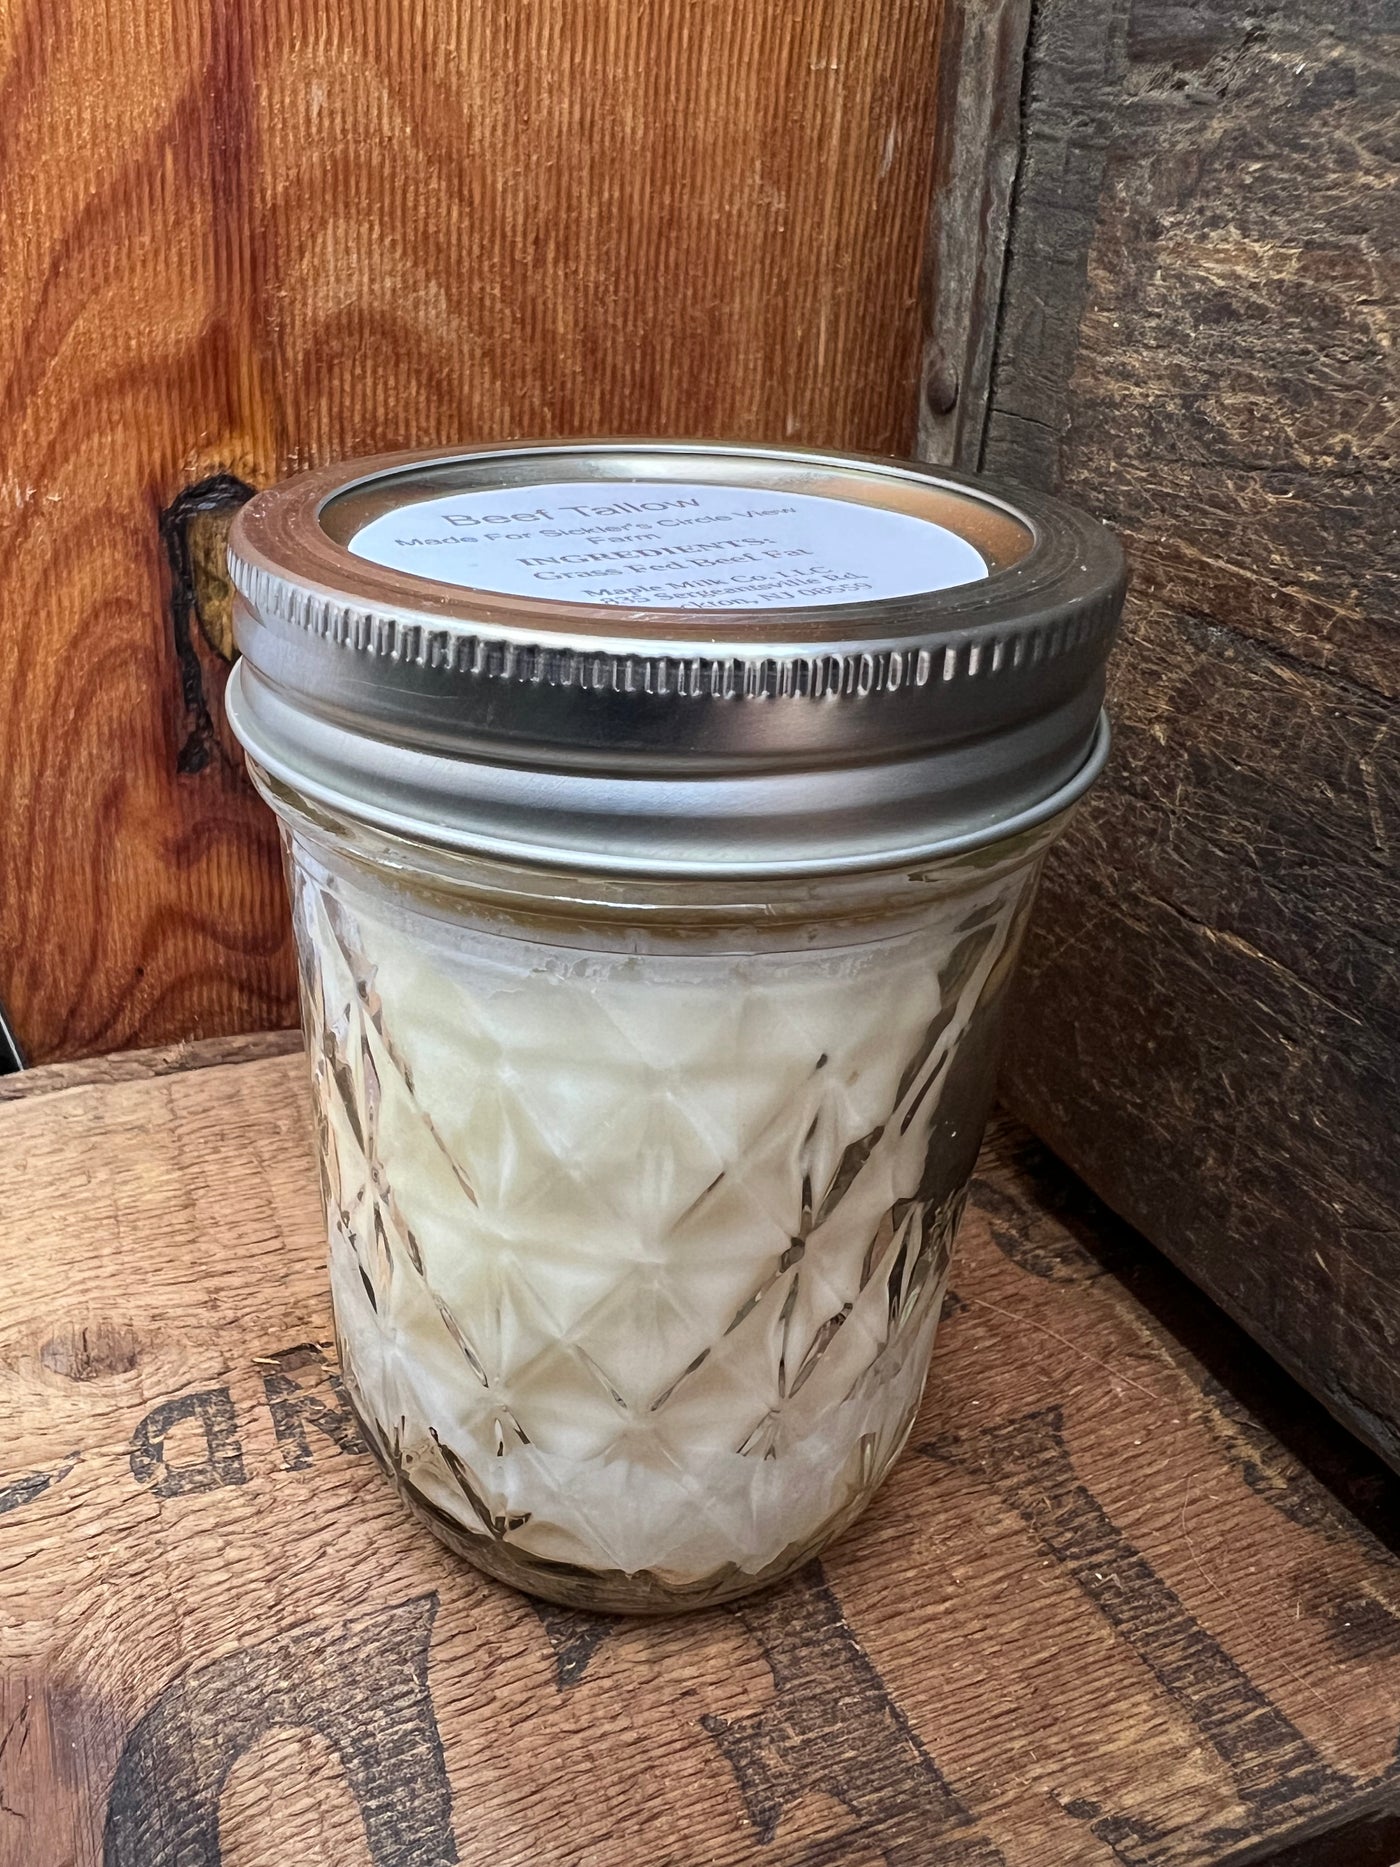 Rendered Beef Tallow - Not Available for Shipping